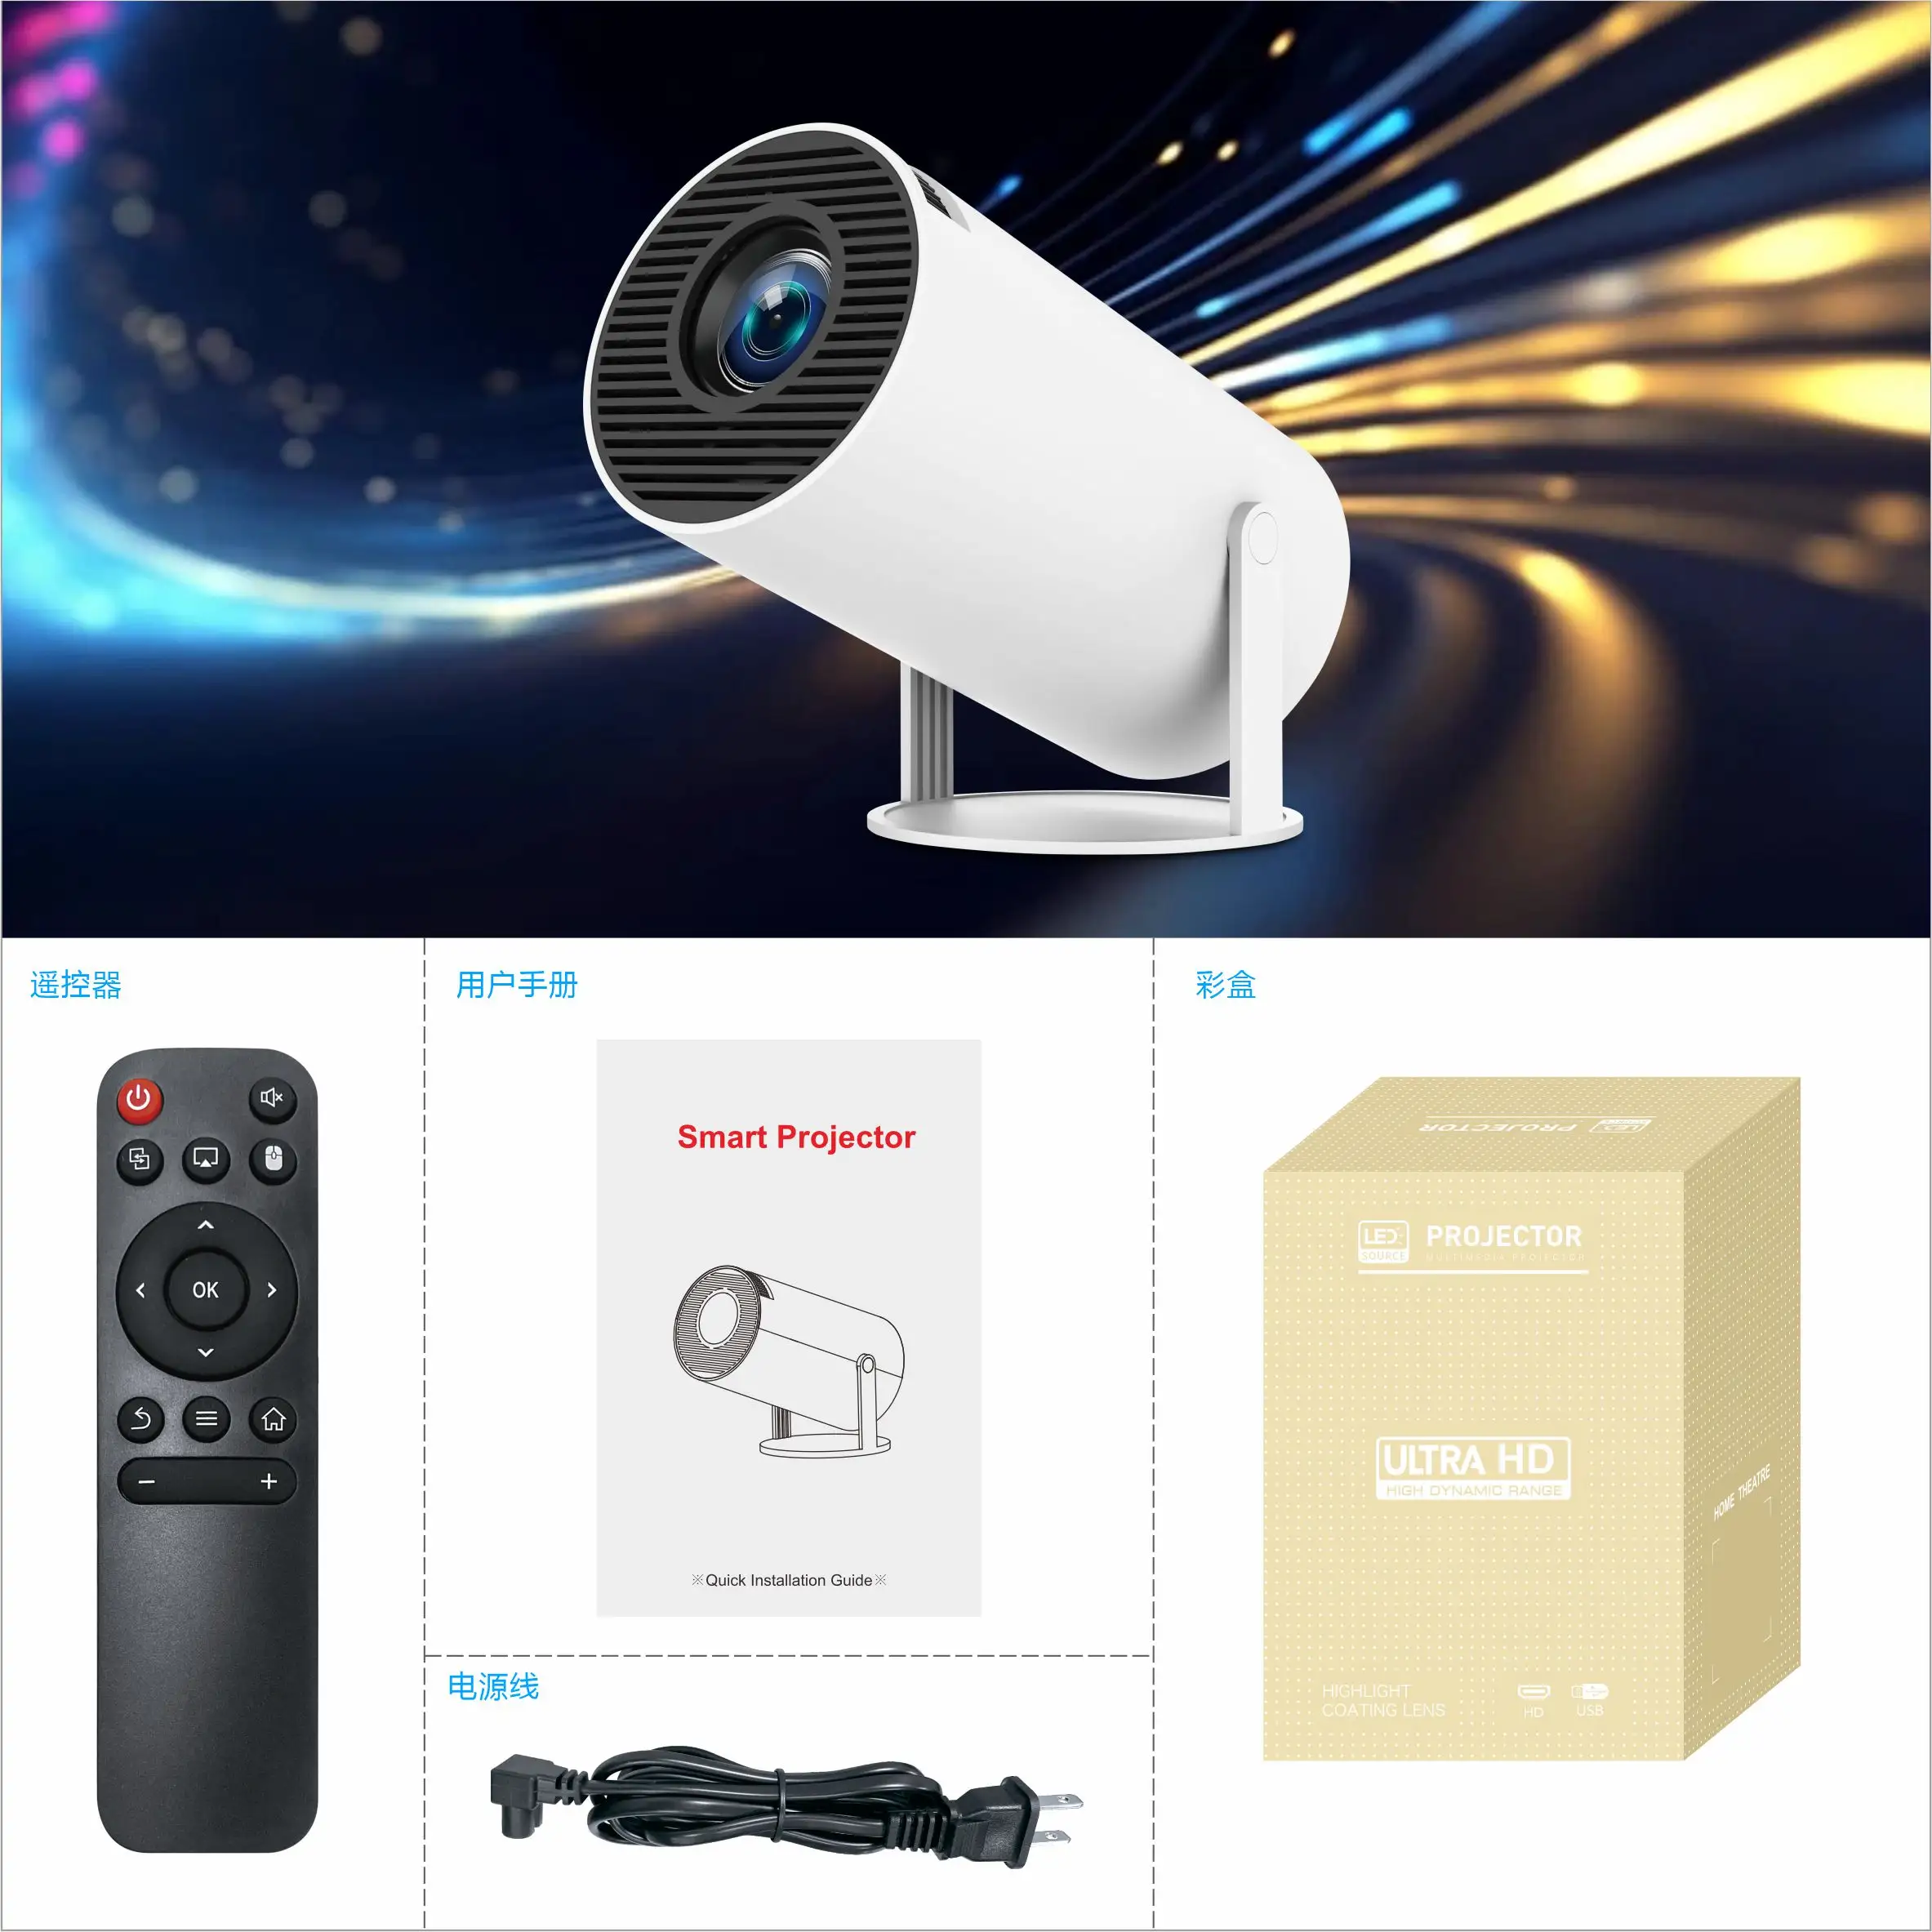 Hotack Factory Latest HY300 Pro Smart Projector auto chart Proyector Mini Home Theater Movie Android Lcd Projector 4K